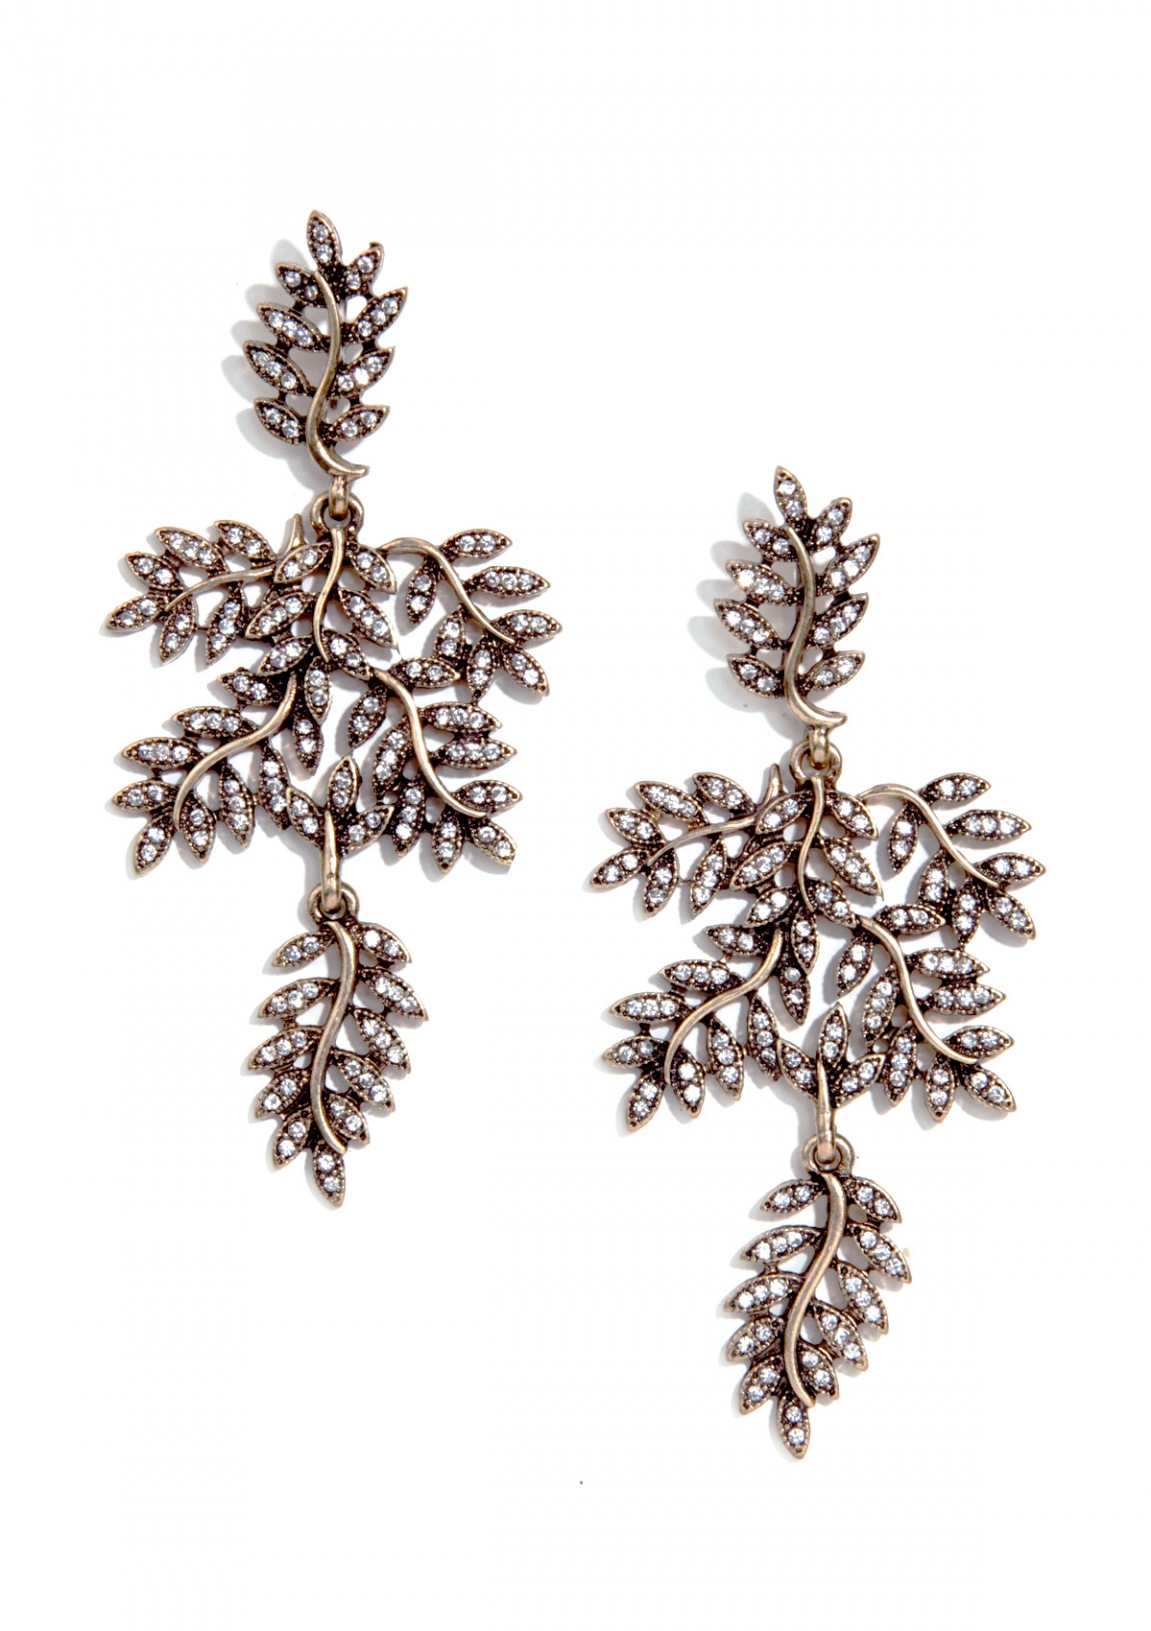 Floral Inspired Statement Earrings - Happiness Boutique